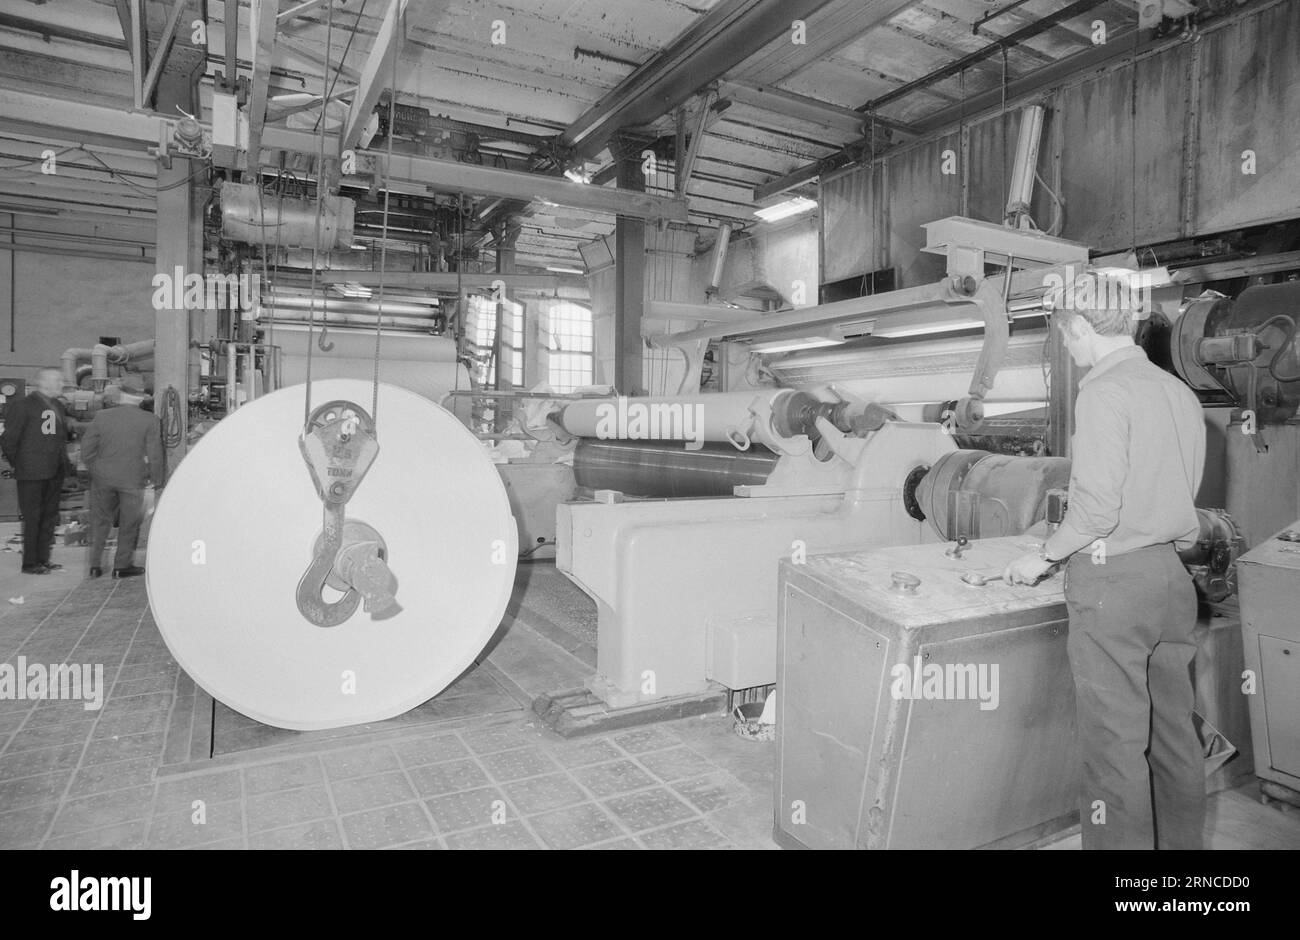 Current 12 - 1 - 1974: The wheels are turning againVestfos Cellulosefabrik is up and running again, after a break of more than three years following the major bankruptcy. But are the jobs safe this time?  Photo: Aage Storløkken / Aktuell / NTB ***PHOTO NOT IMAGE PROCESSED*** This text has been automatically translated! Stock Photo